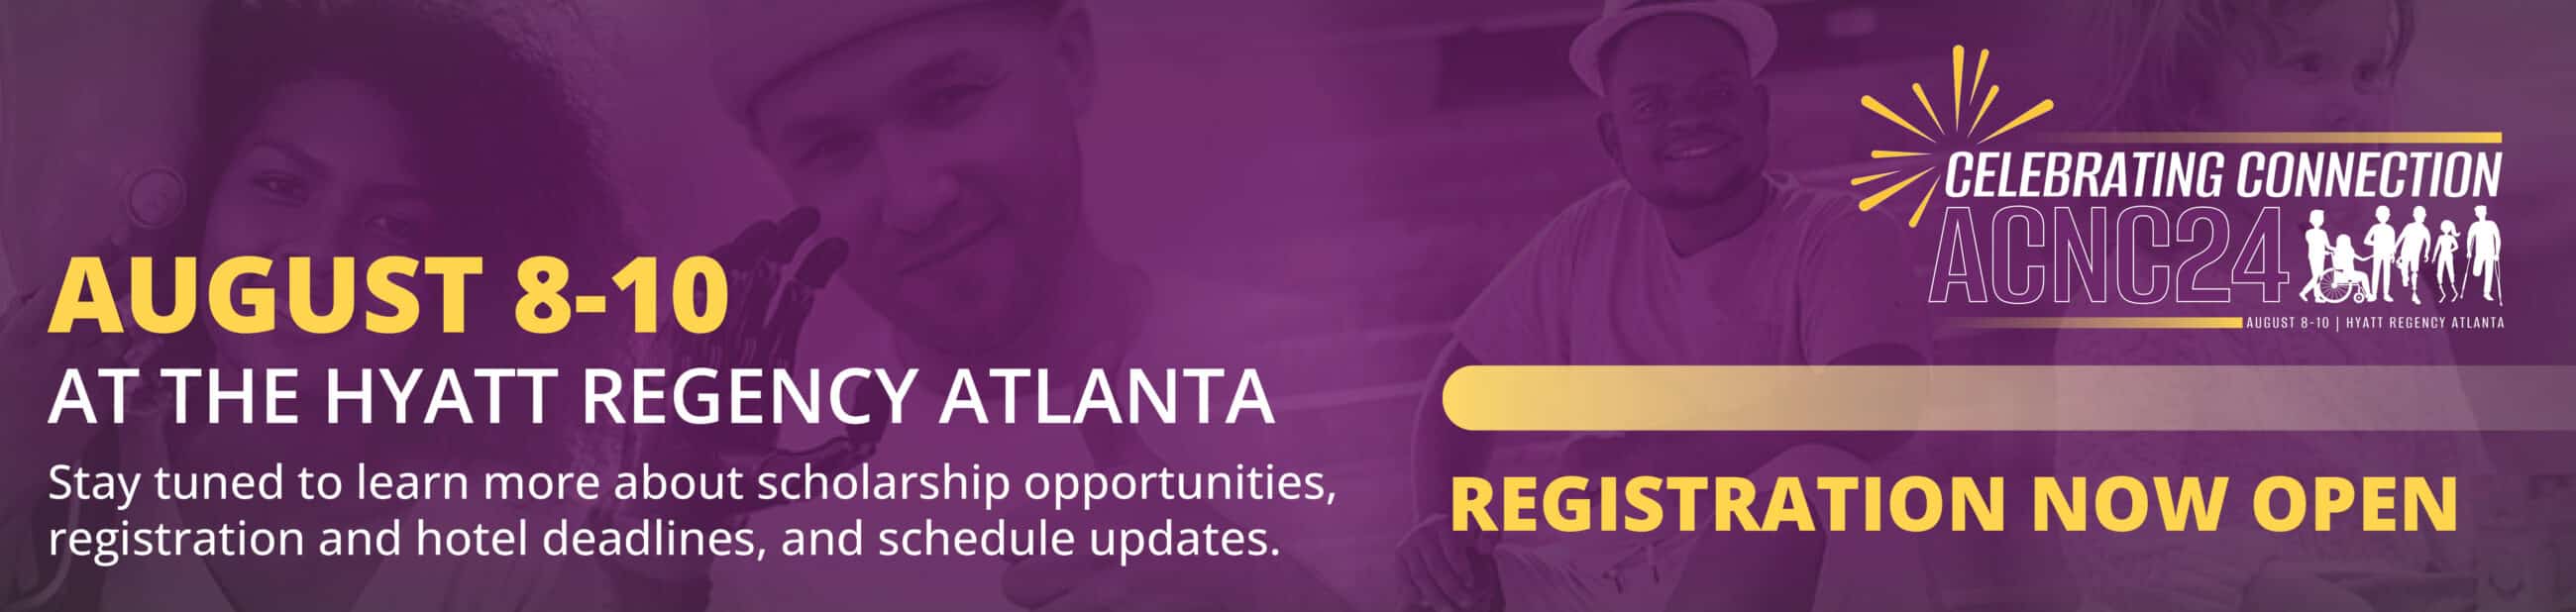 Save the Date: August 8-10, 2024 for Amputee Coalition's National Conference in Atlanta, Georgia!